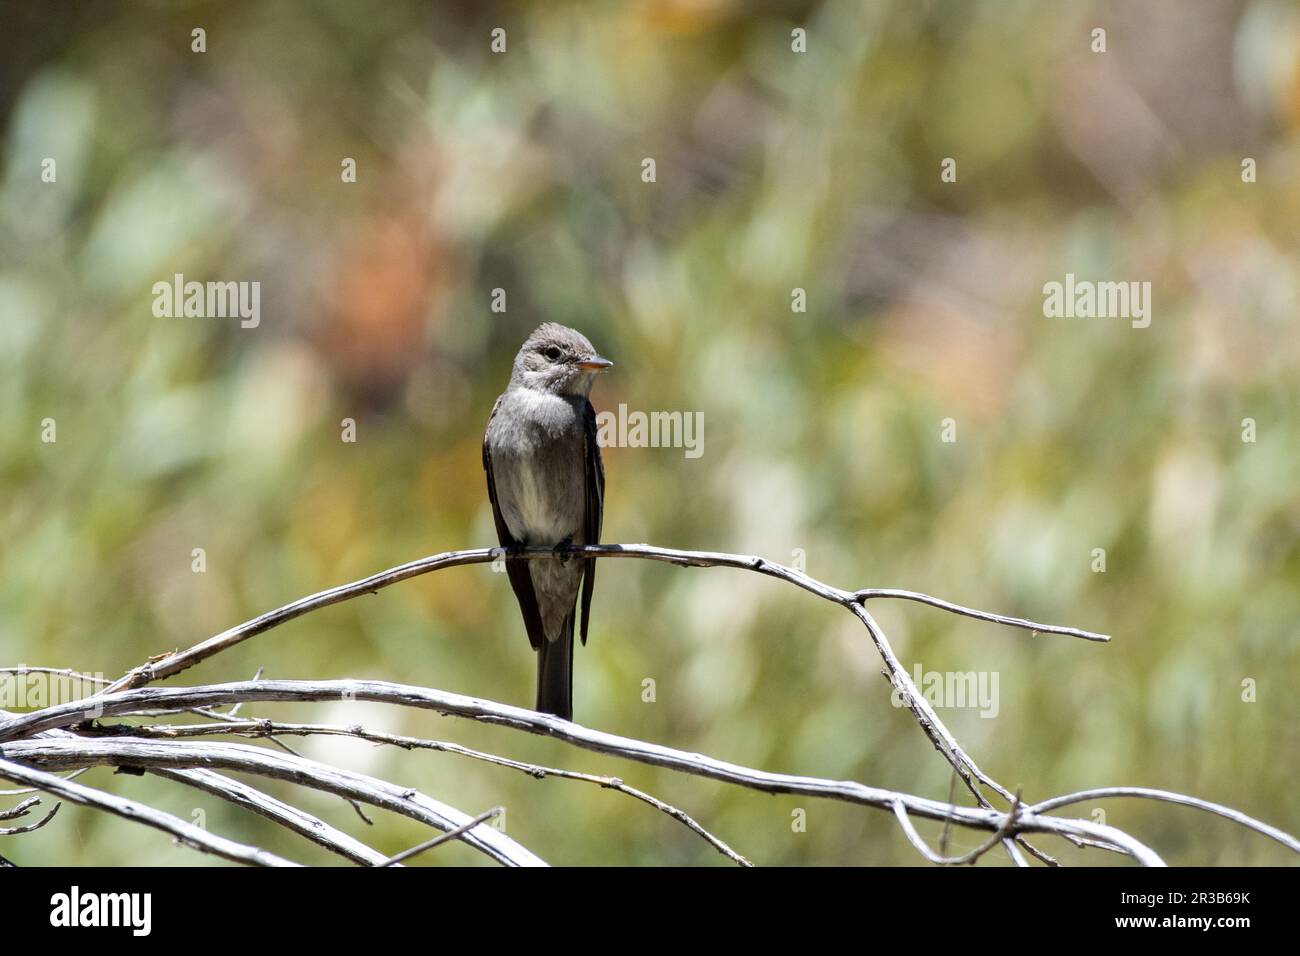 Western wood pewee sitting on a perch Stock Photo